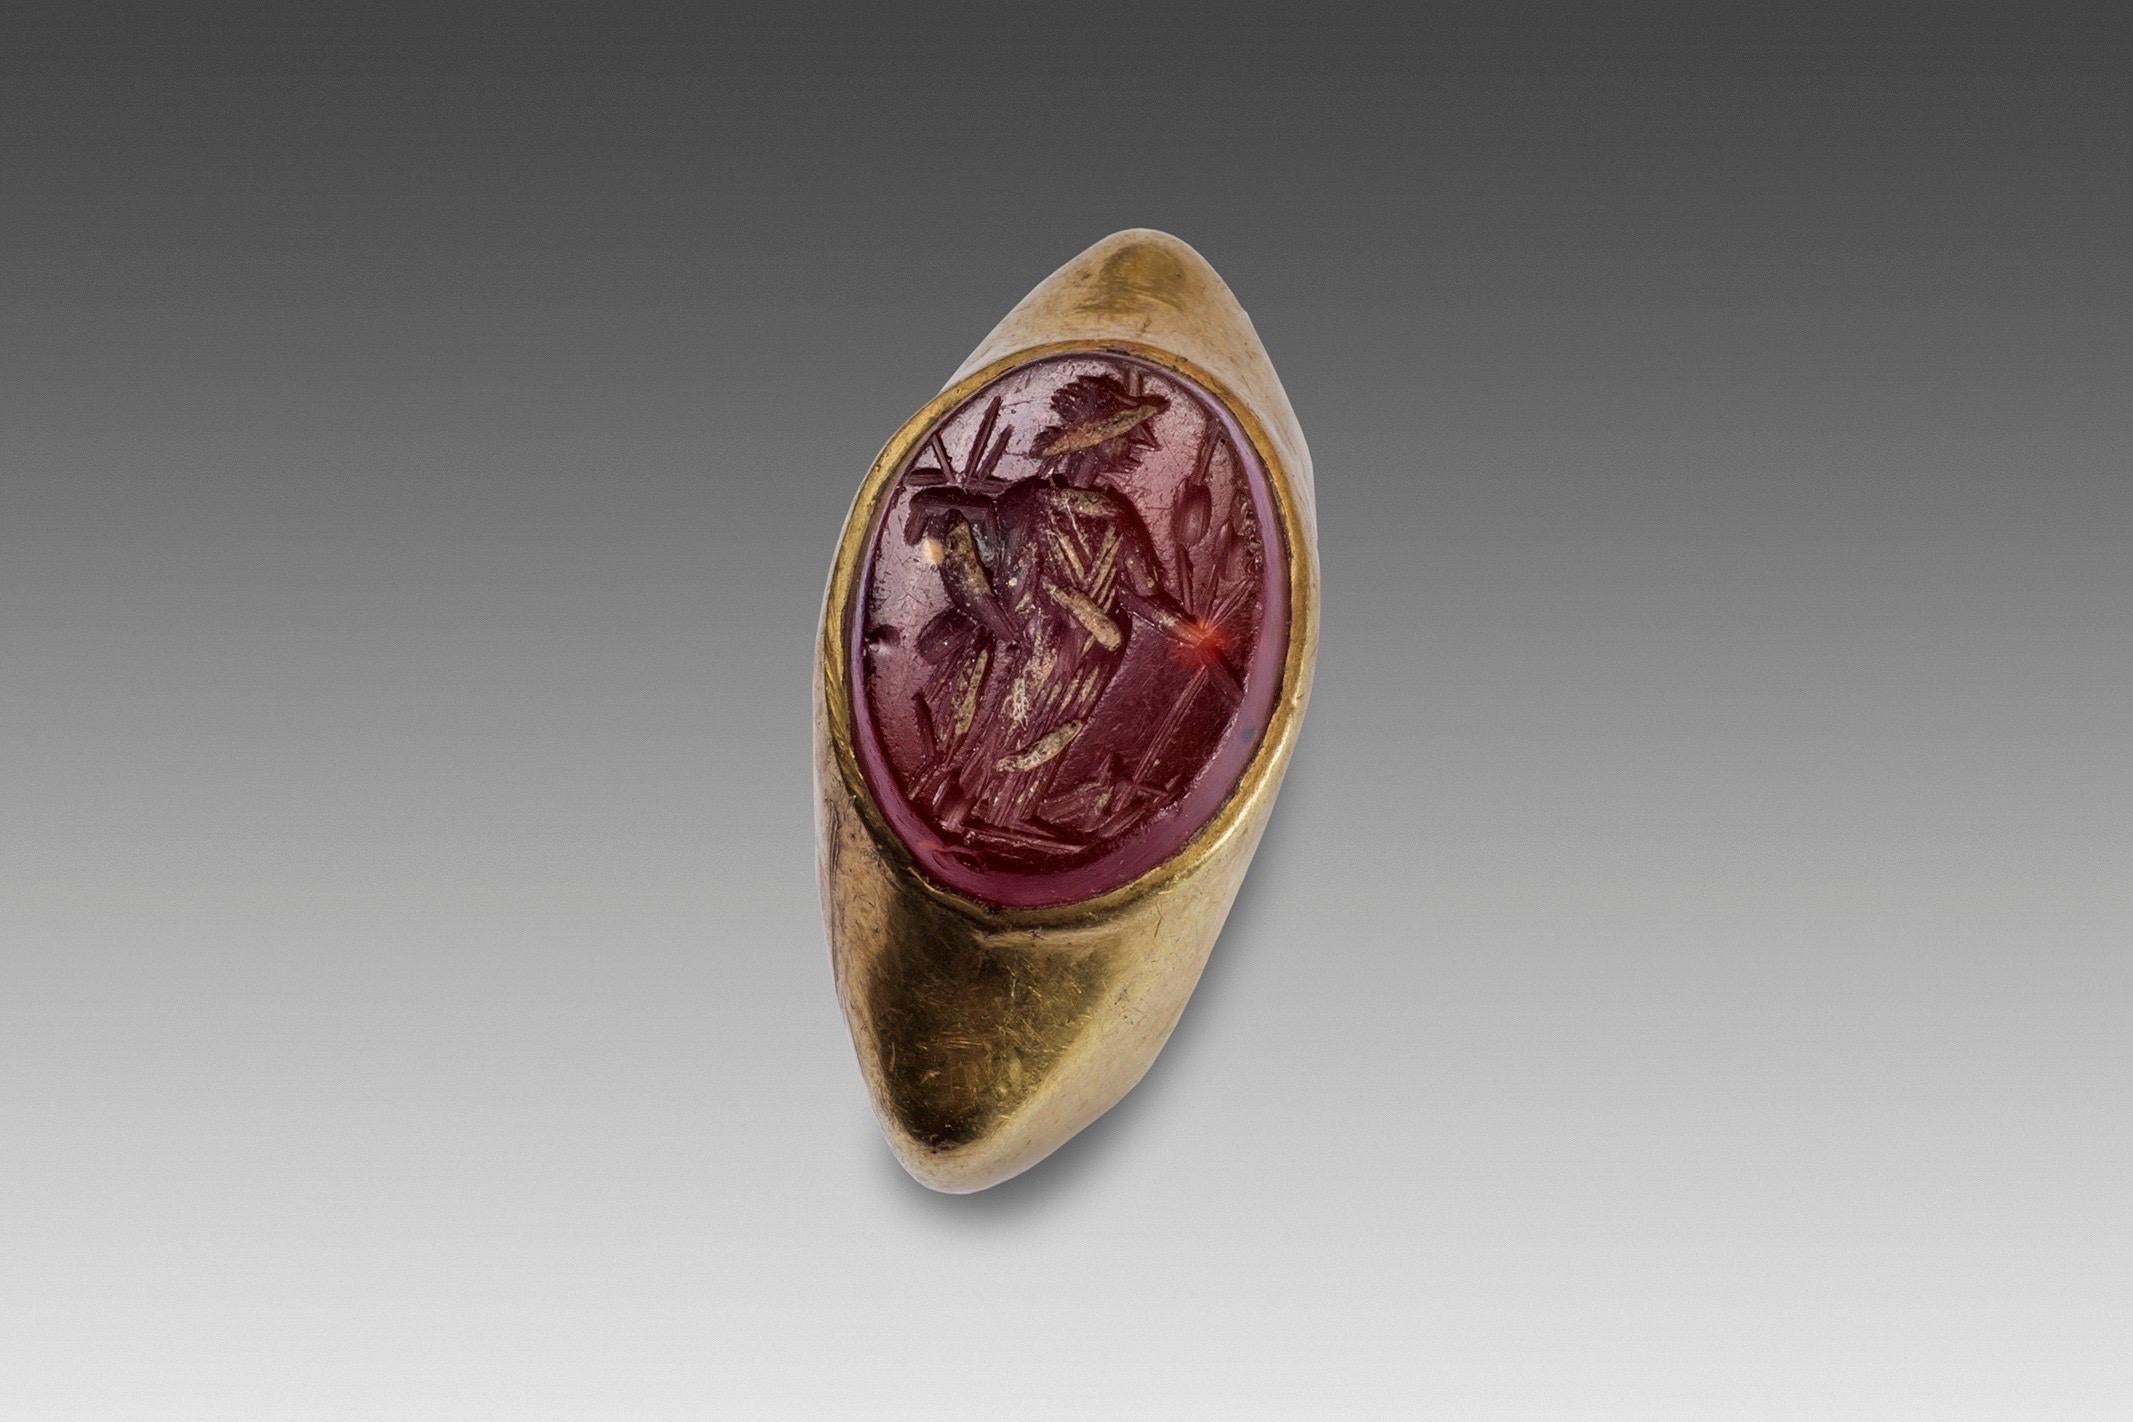 Hand-Crafted Goddess Fortuna Carnelian Roman Ring, Imperial Era, 1st-2nd c AD, Provenance